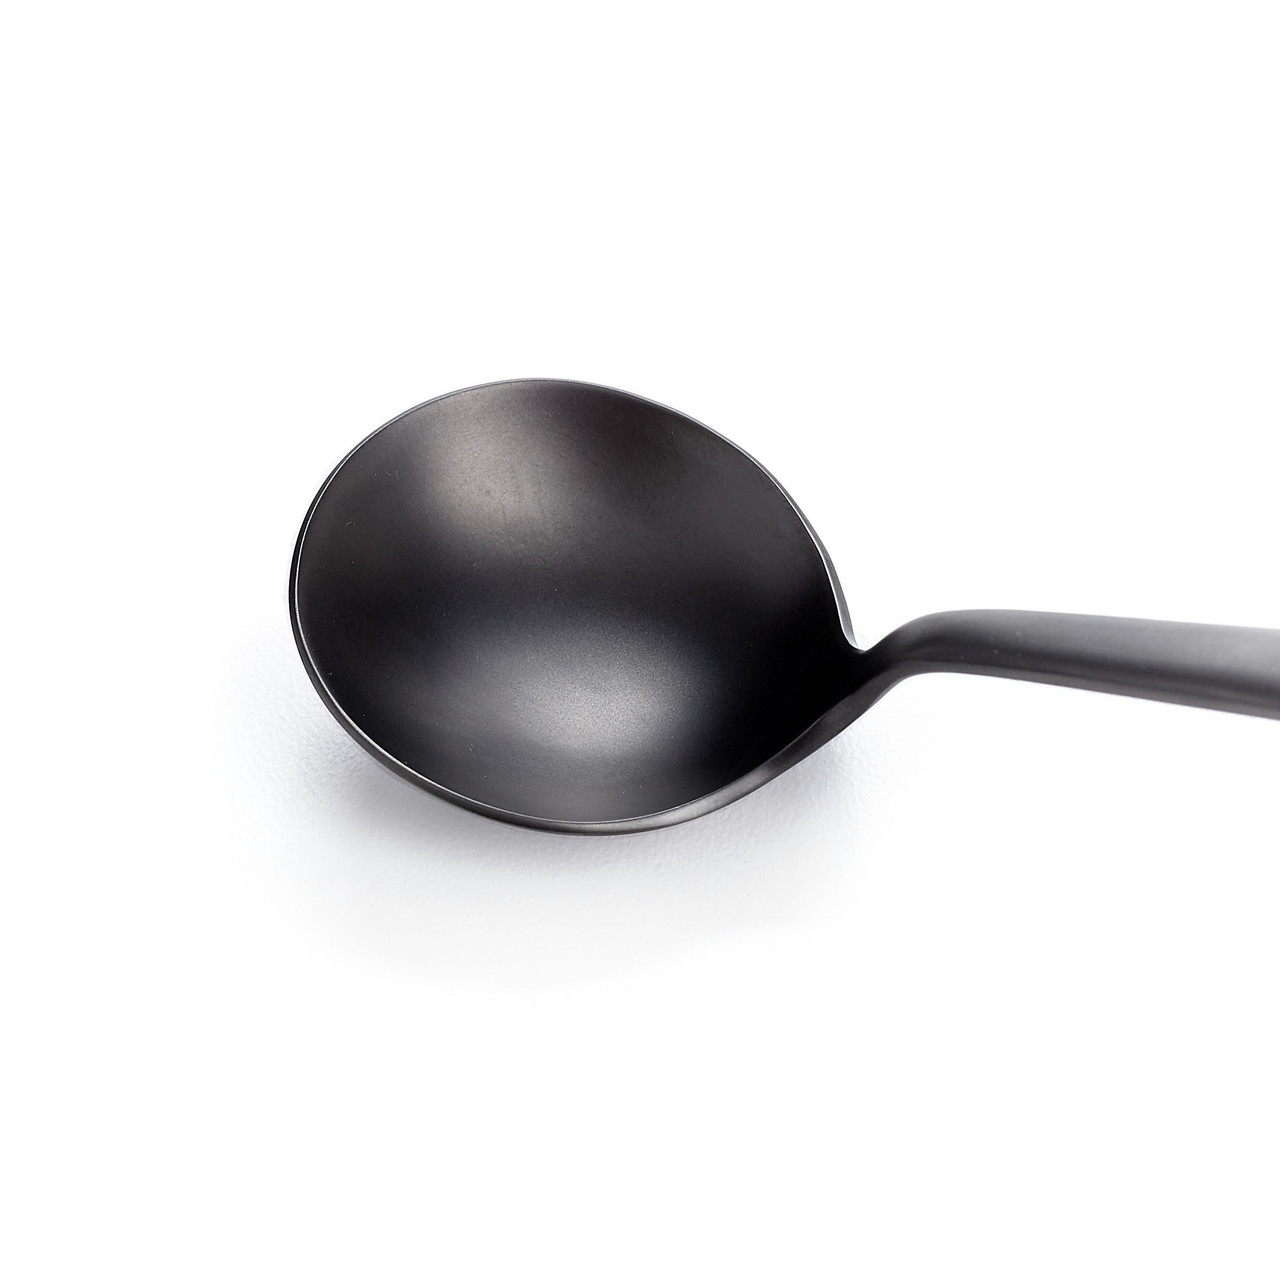 https://cdn11.bigcommerce.com/s-6h7ychjk4/images/stencil/1280x1280/products/8176/89289/hario-kasuya-cupping-spoon-matte-black-bowl-detail__75529.1597181749.jpg?c=1&imbypass=on